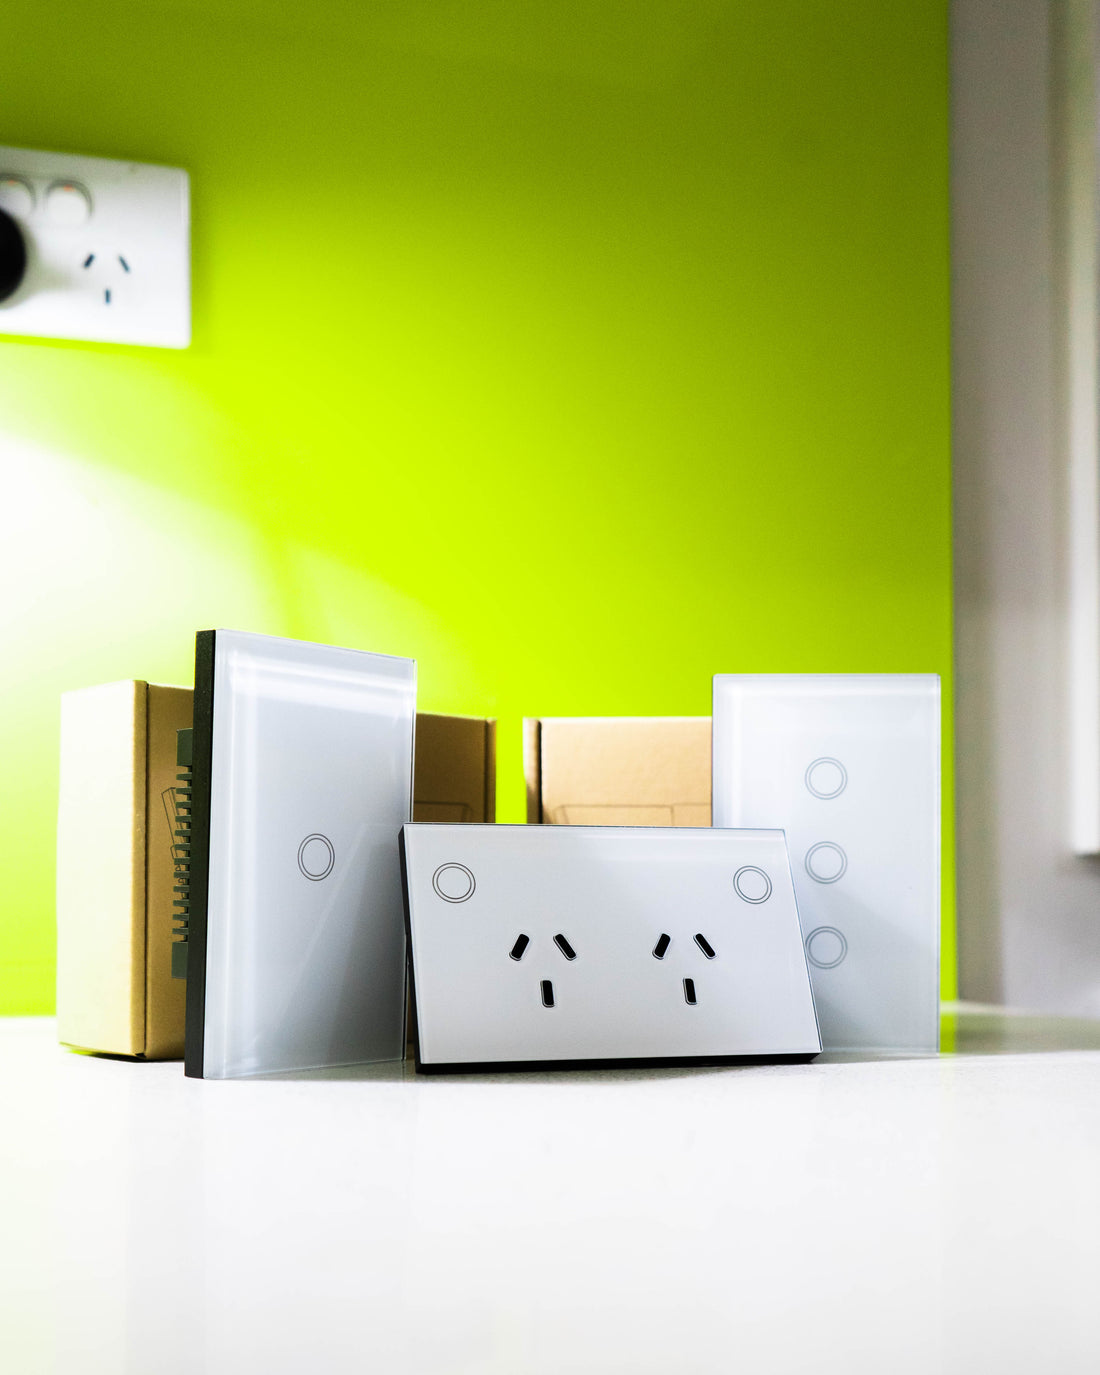 Smart Home Zigbee Light Switches, Online Manual and Help Guide.